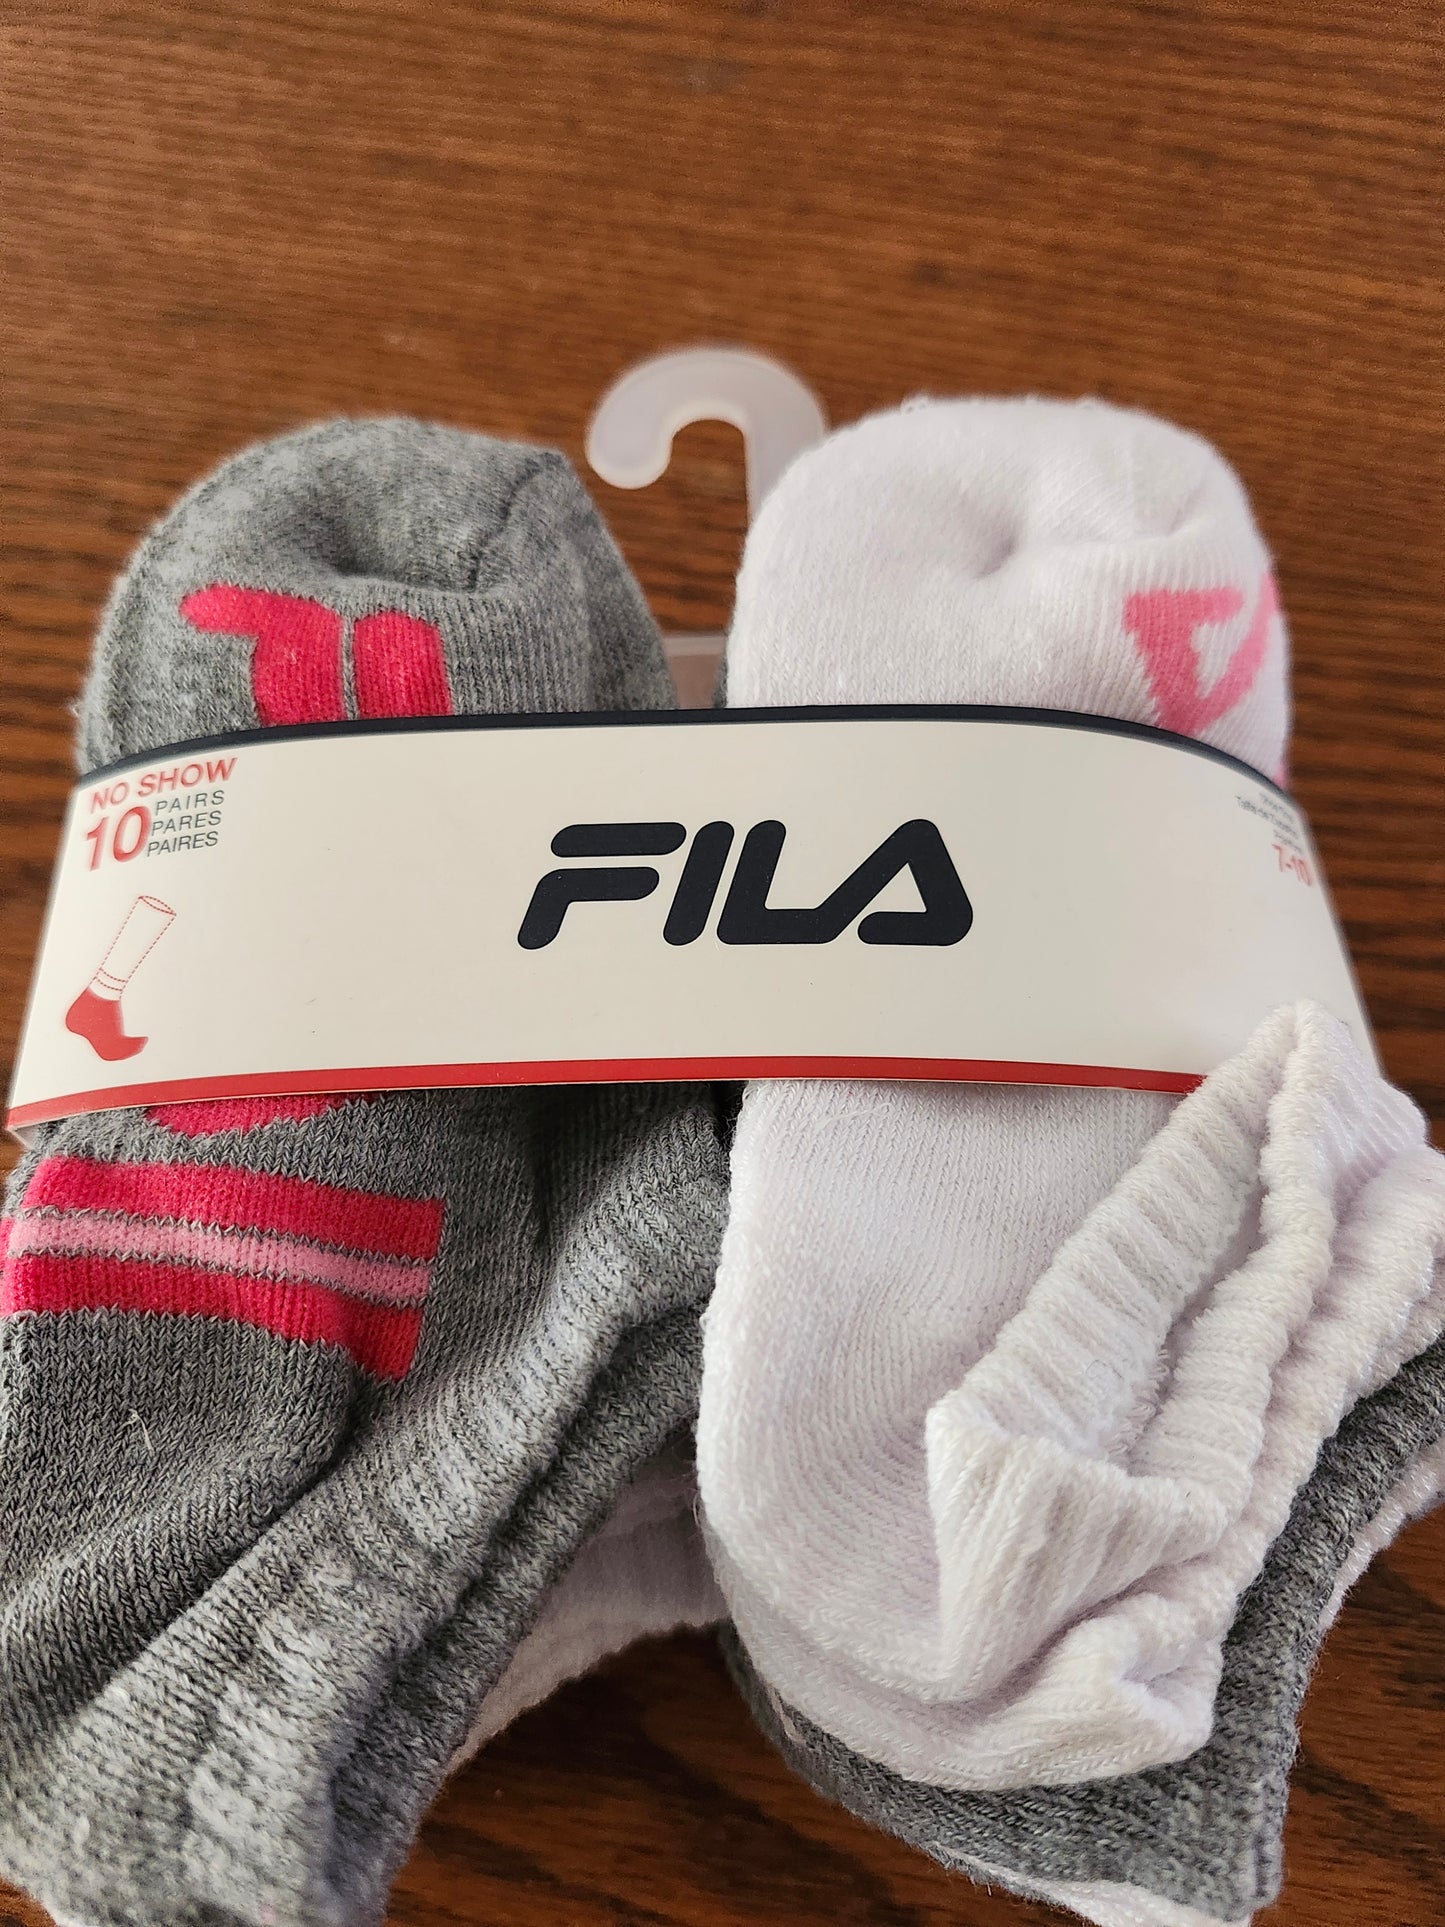 Kids Unisex No Show Fila Socks 10 Pairs  "New Arrivel" Fit Shoe Size 7-10  Color Gray/White (SOLD OUT) Thanks For Your Purchase!